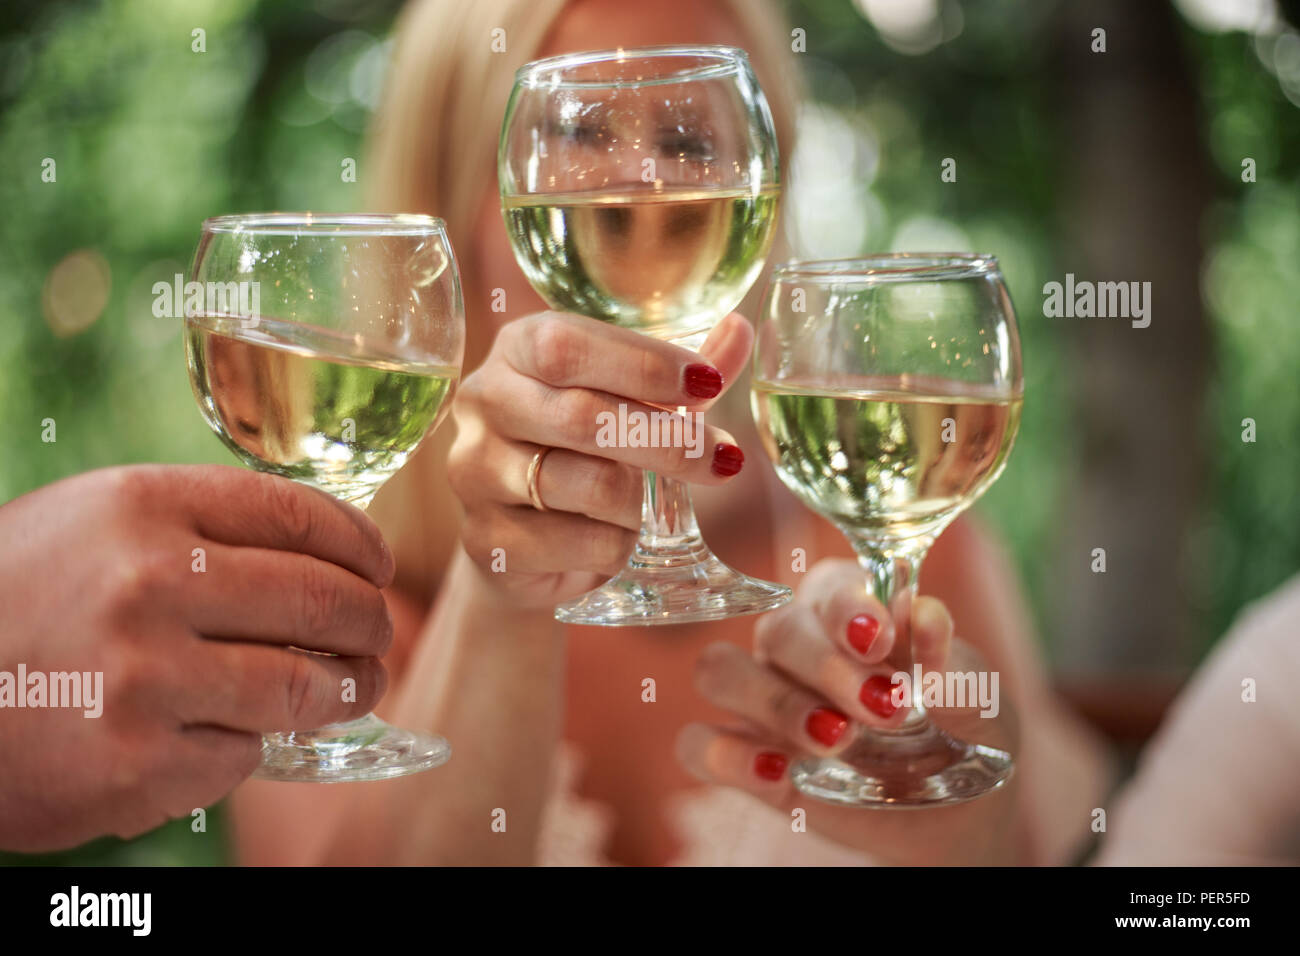 Closeup photo of hands clinking glasses with white wine Stock Photo